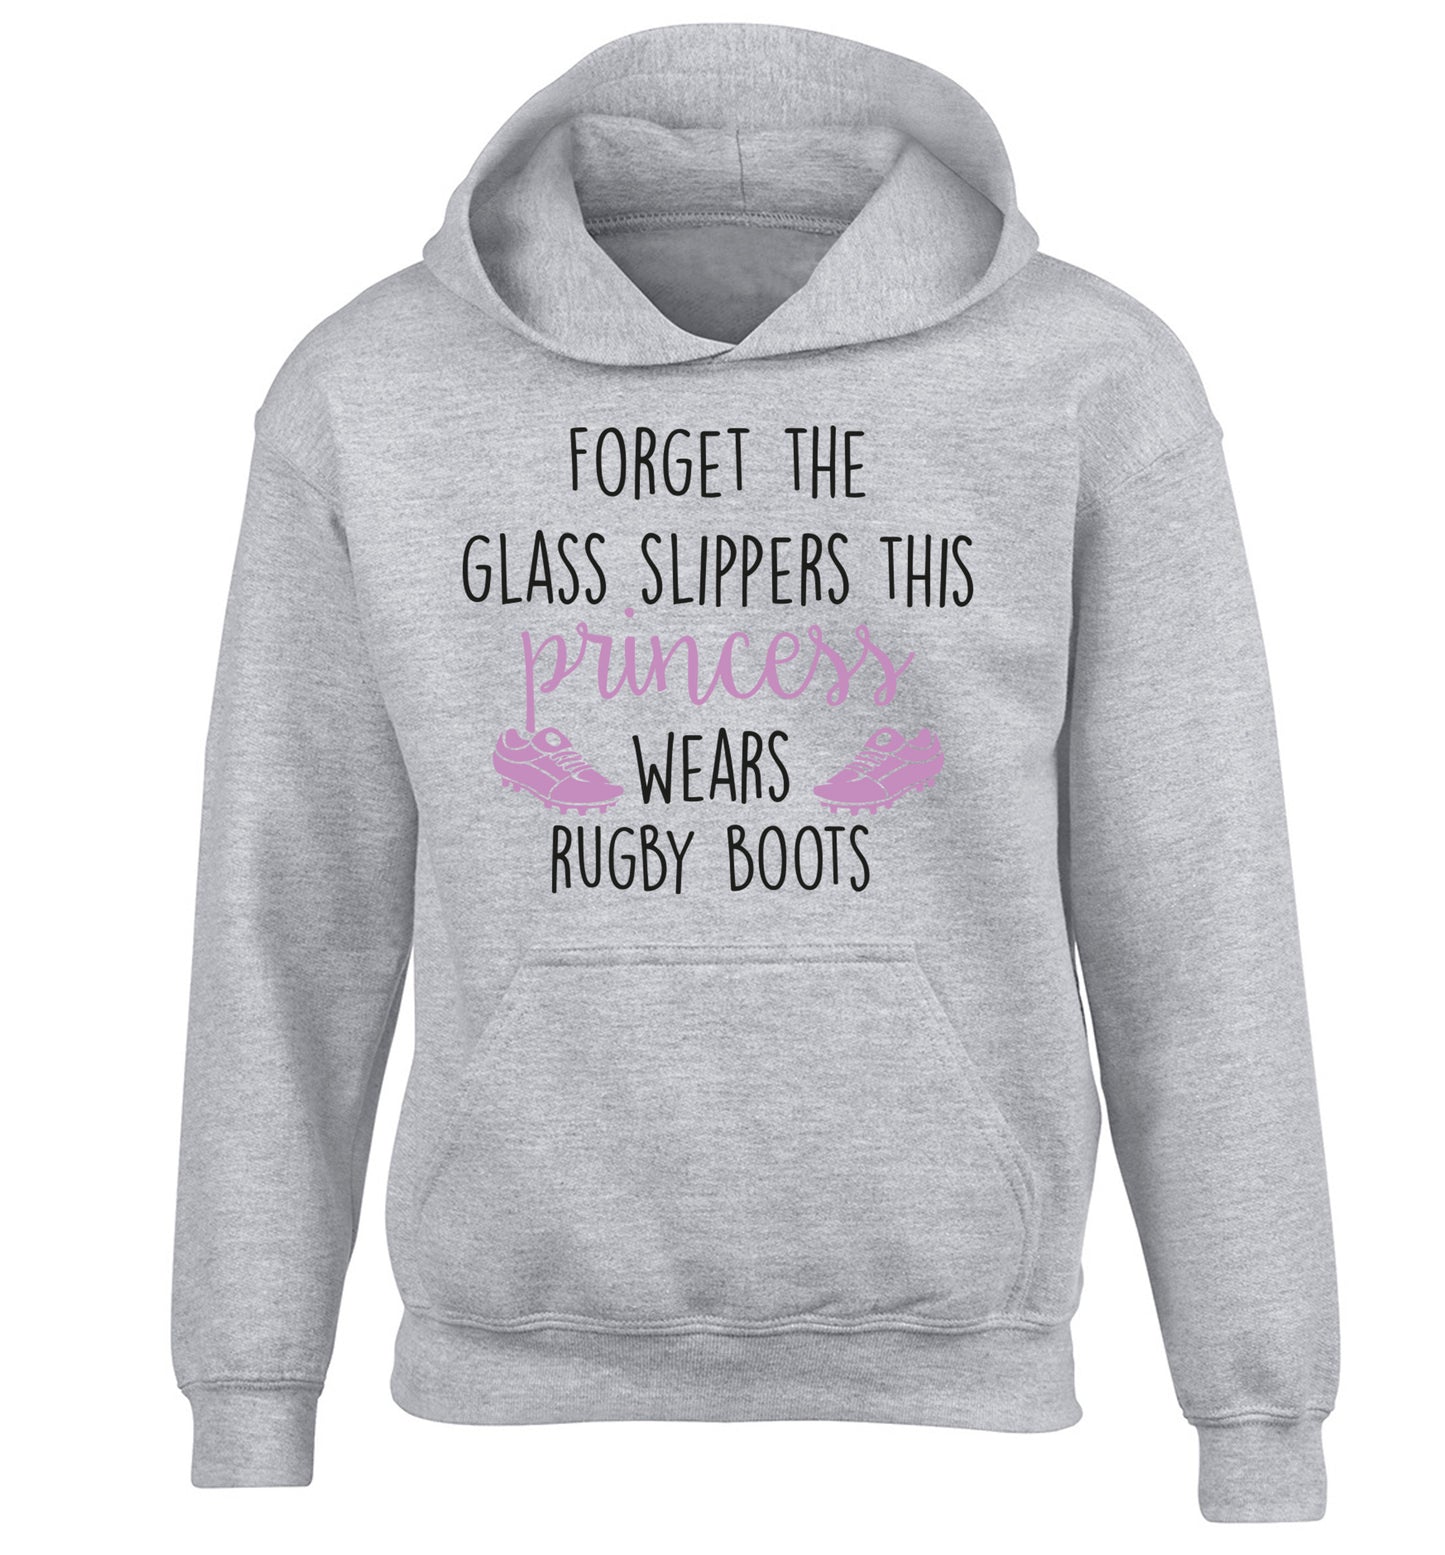 Forget the glass slippers this princess wears rugby boots children's grey hoodie 12-14 Years